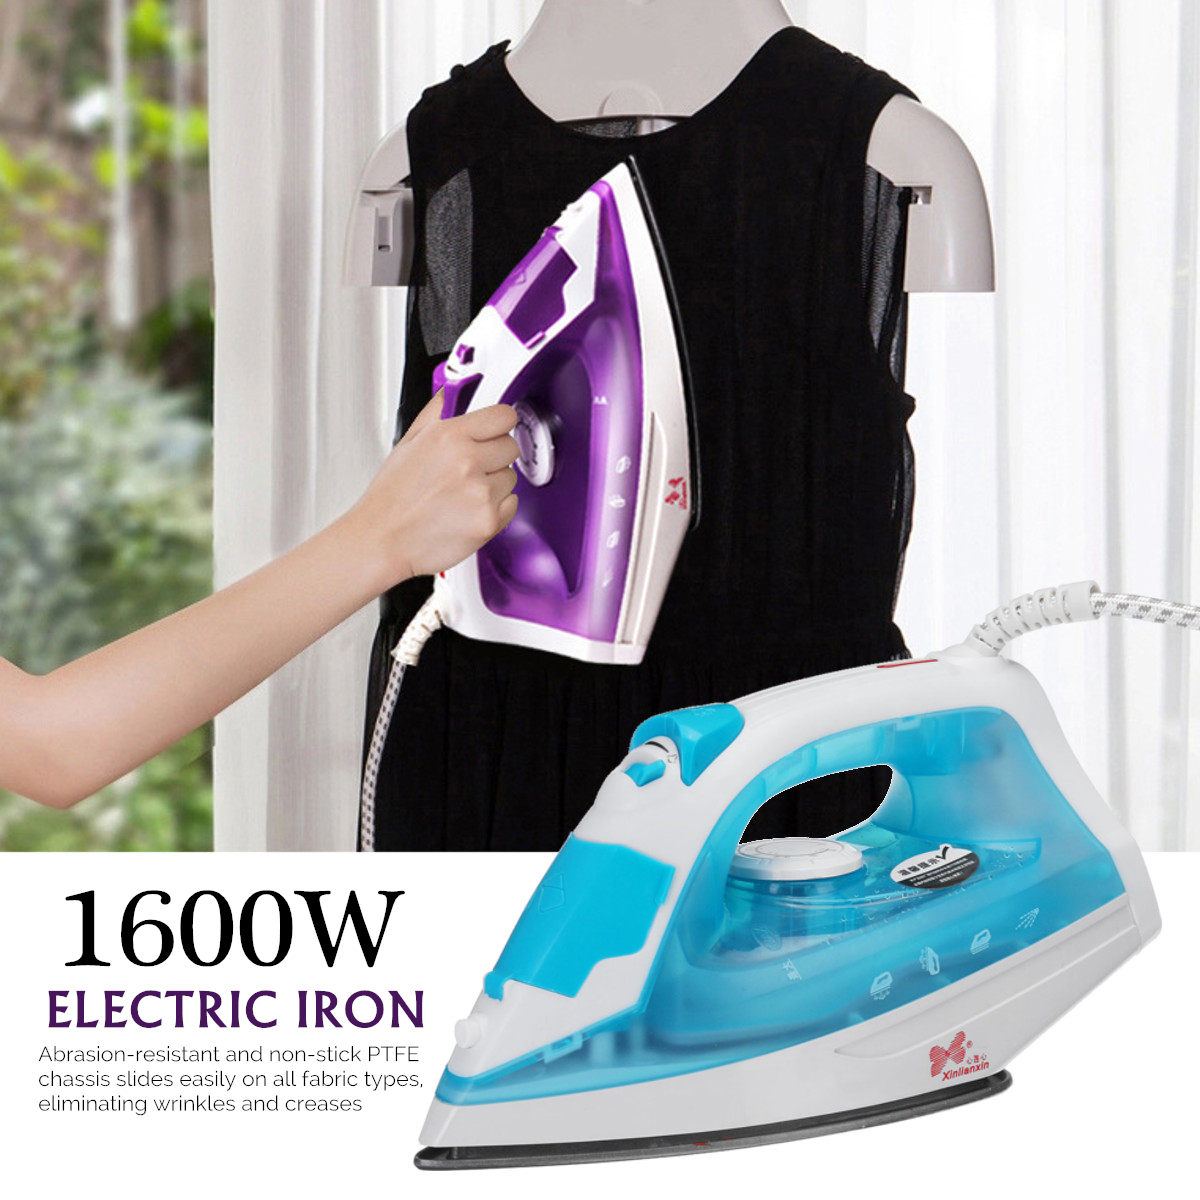 1600W-220V-Handheld-Portable-Steam-Iron-Electric-Garment-Cleaner-5-speed-Temperature-Adjustment-1744438-2